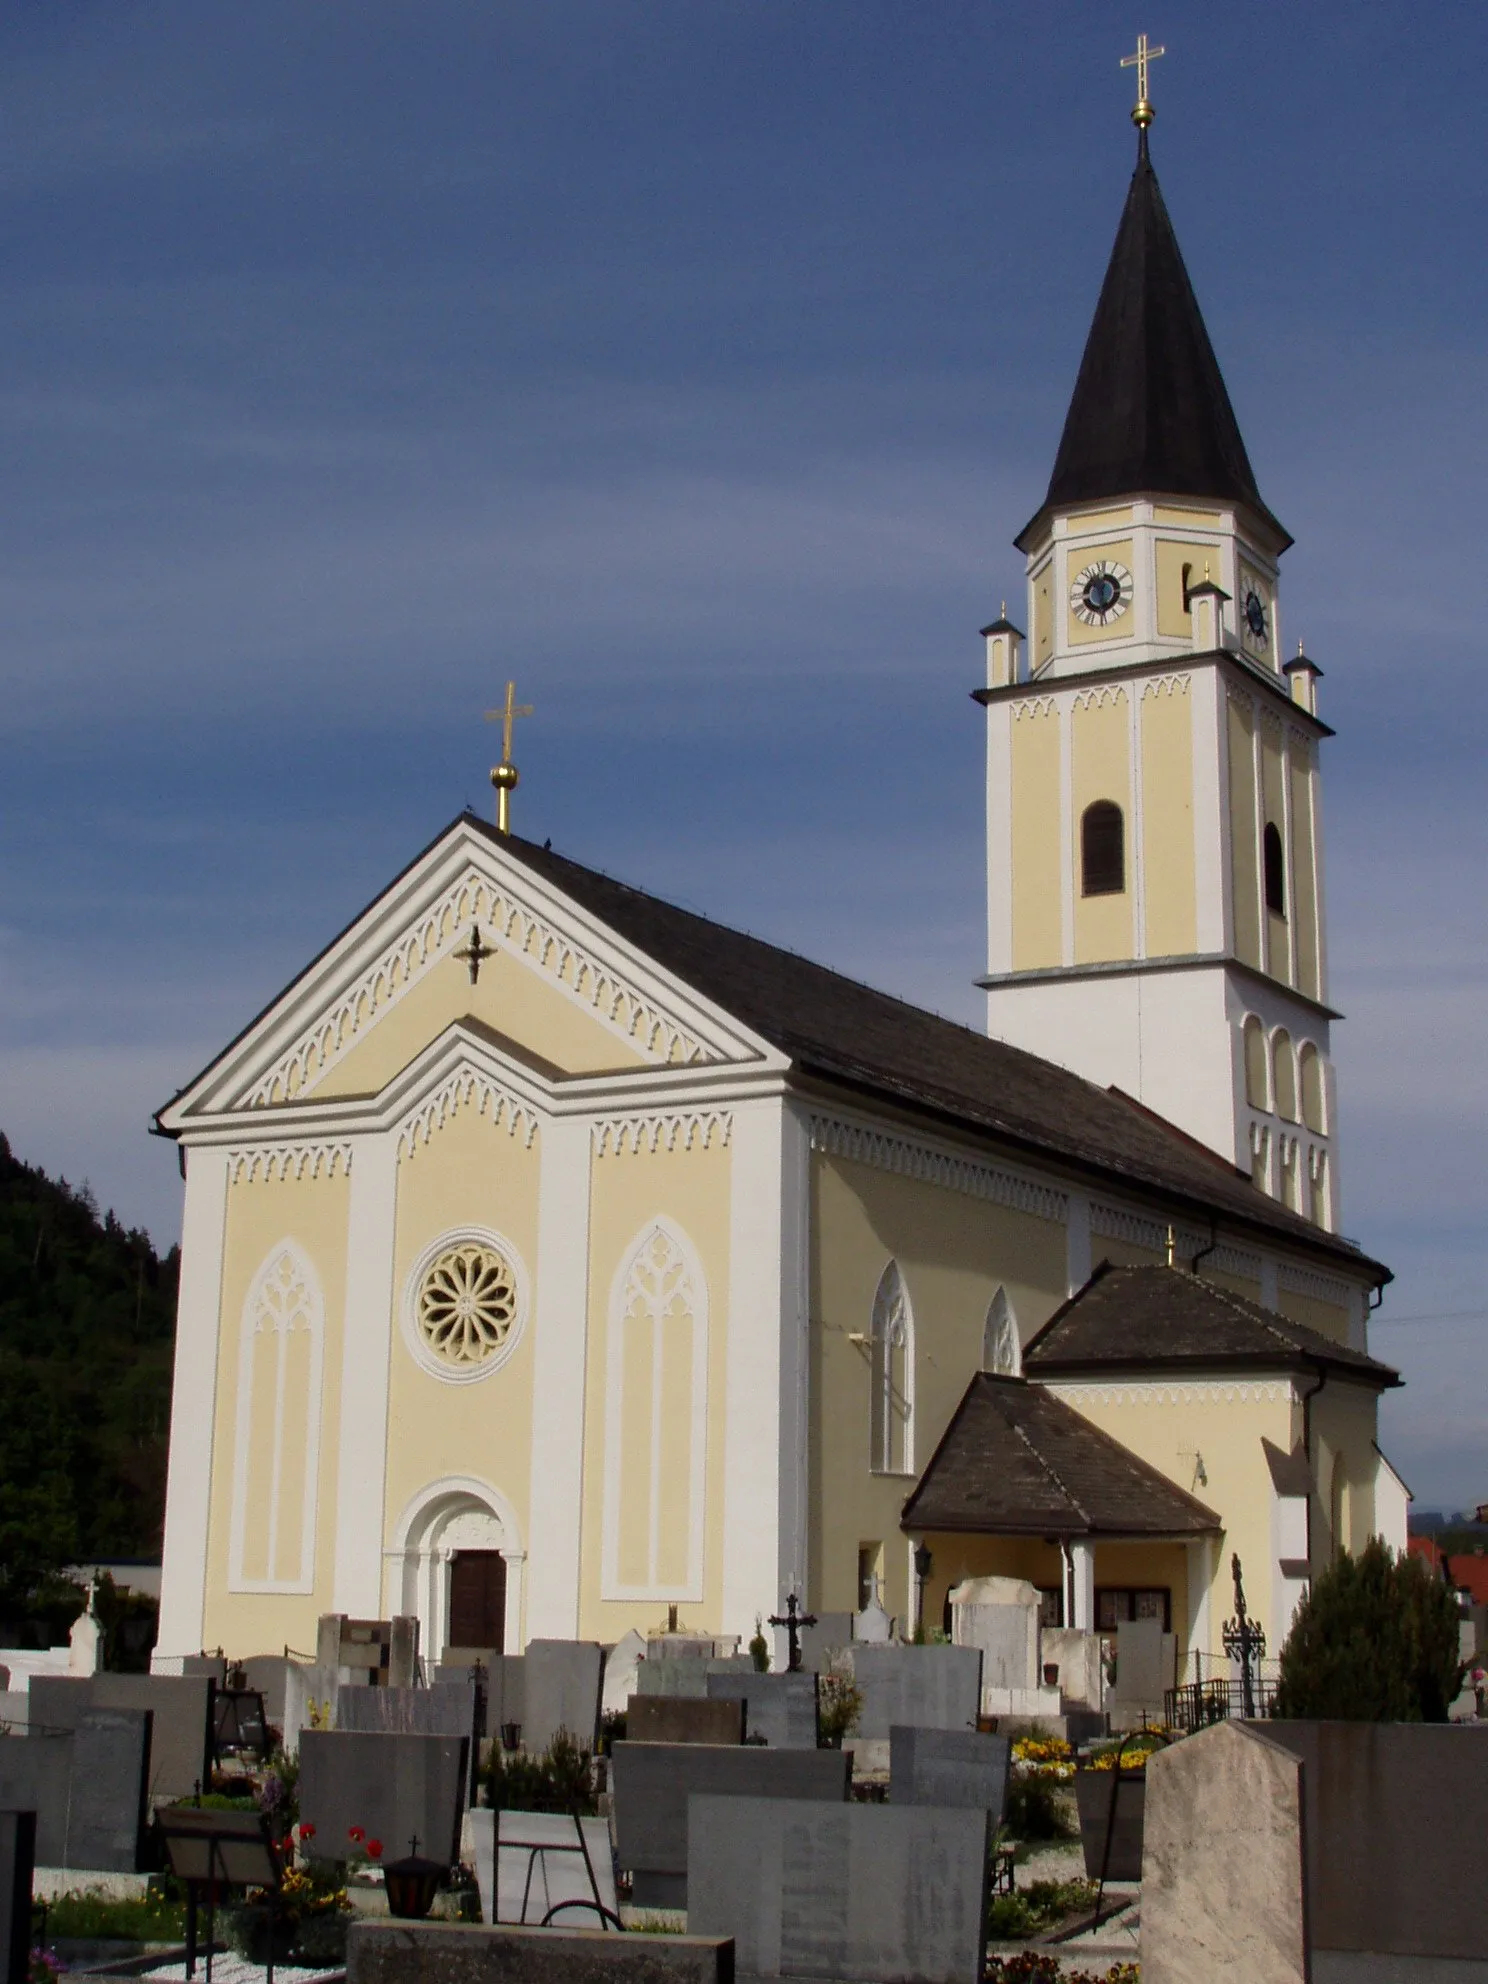 Photo showing: Pfarrkirche St.Ruprecht in Völkermarkt Kärnten/Church St.Ruprecht, Völkermarkt, Carinthia

This media shows the protected monument with the number 63657 in Austria. (Commons, de, Wikidata)